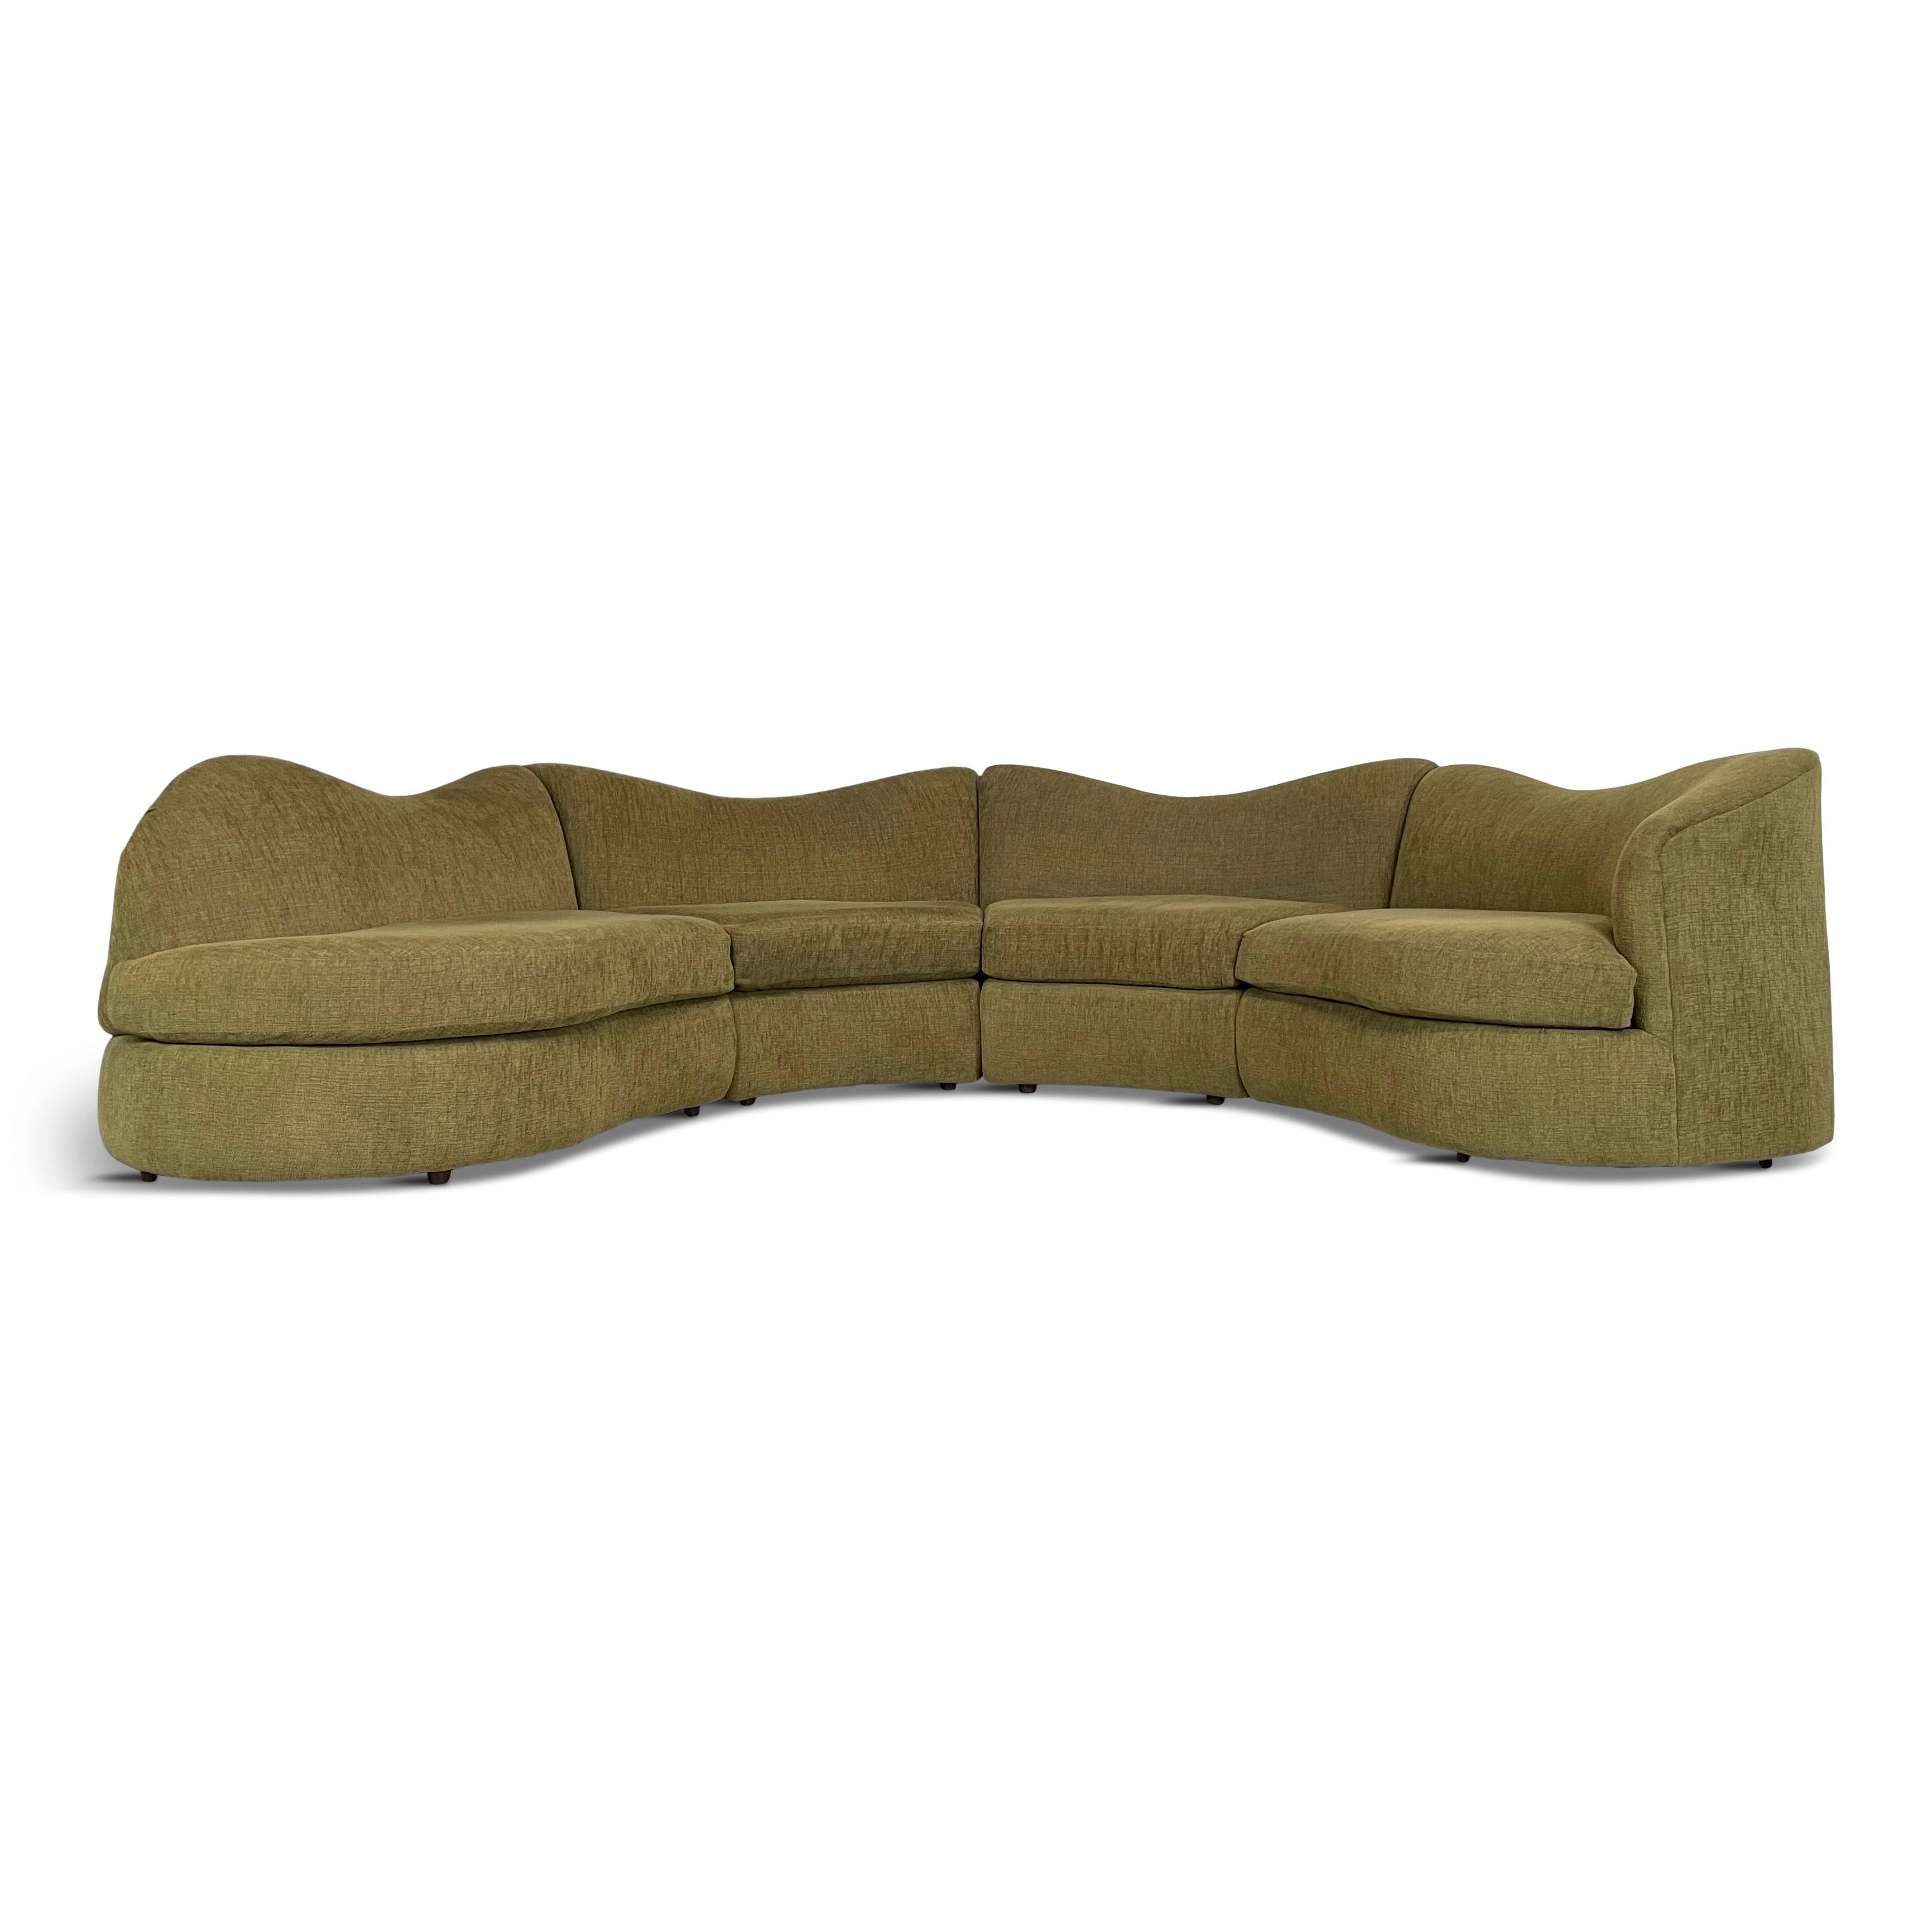 This four piece sectional sofa has incredible design lines from the 1990's. The fabric is dated and needs recovering. Foam and padding are excellent.